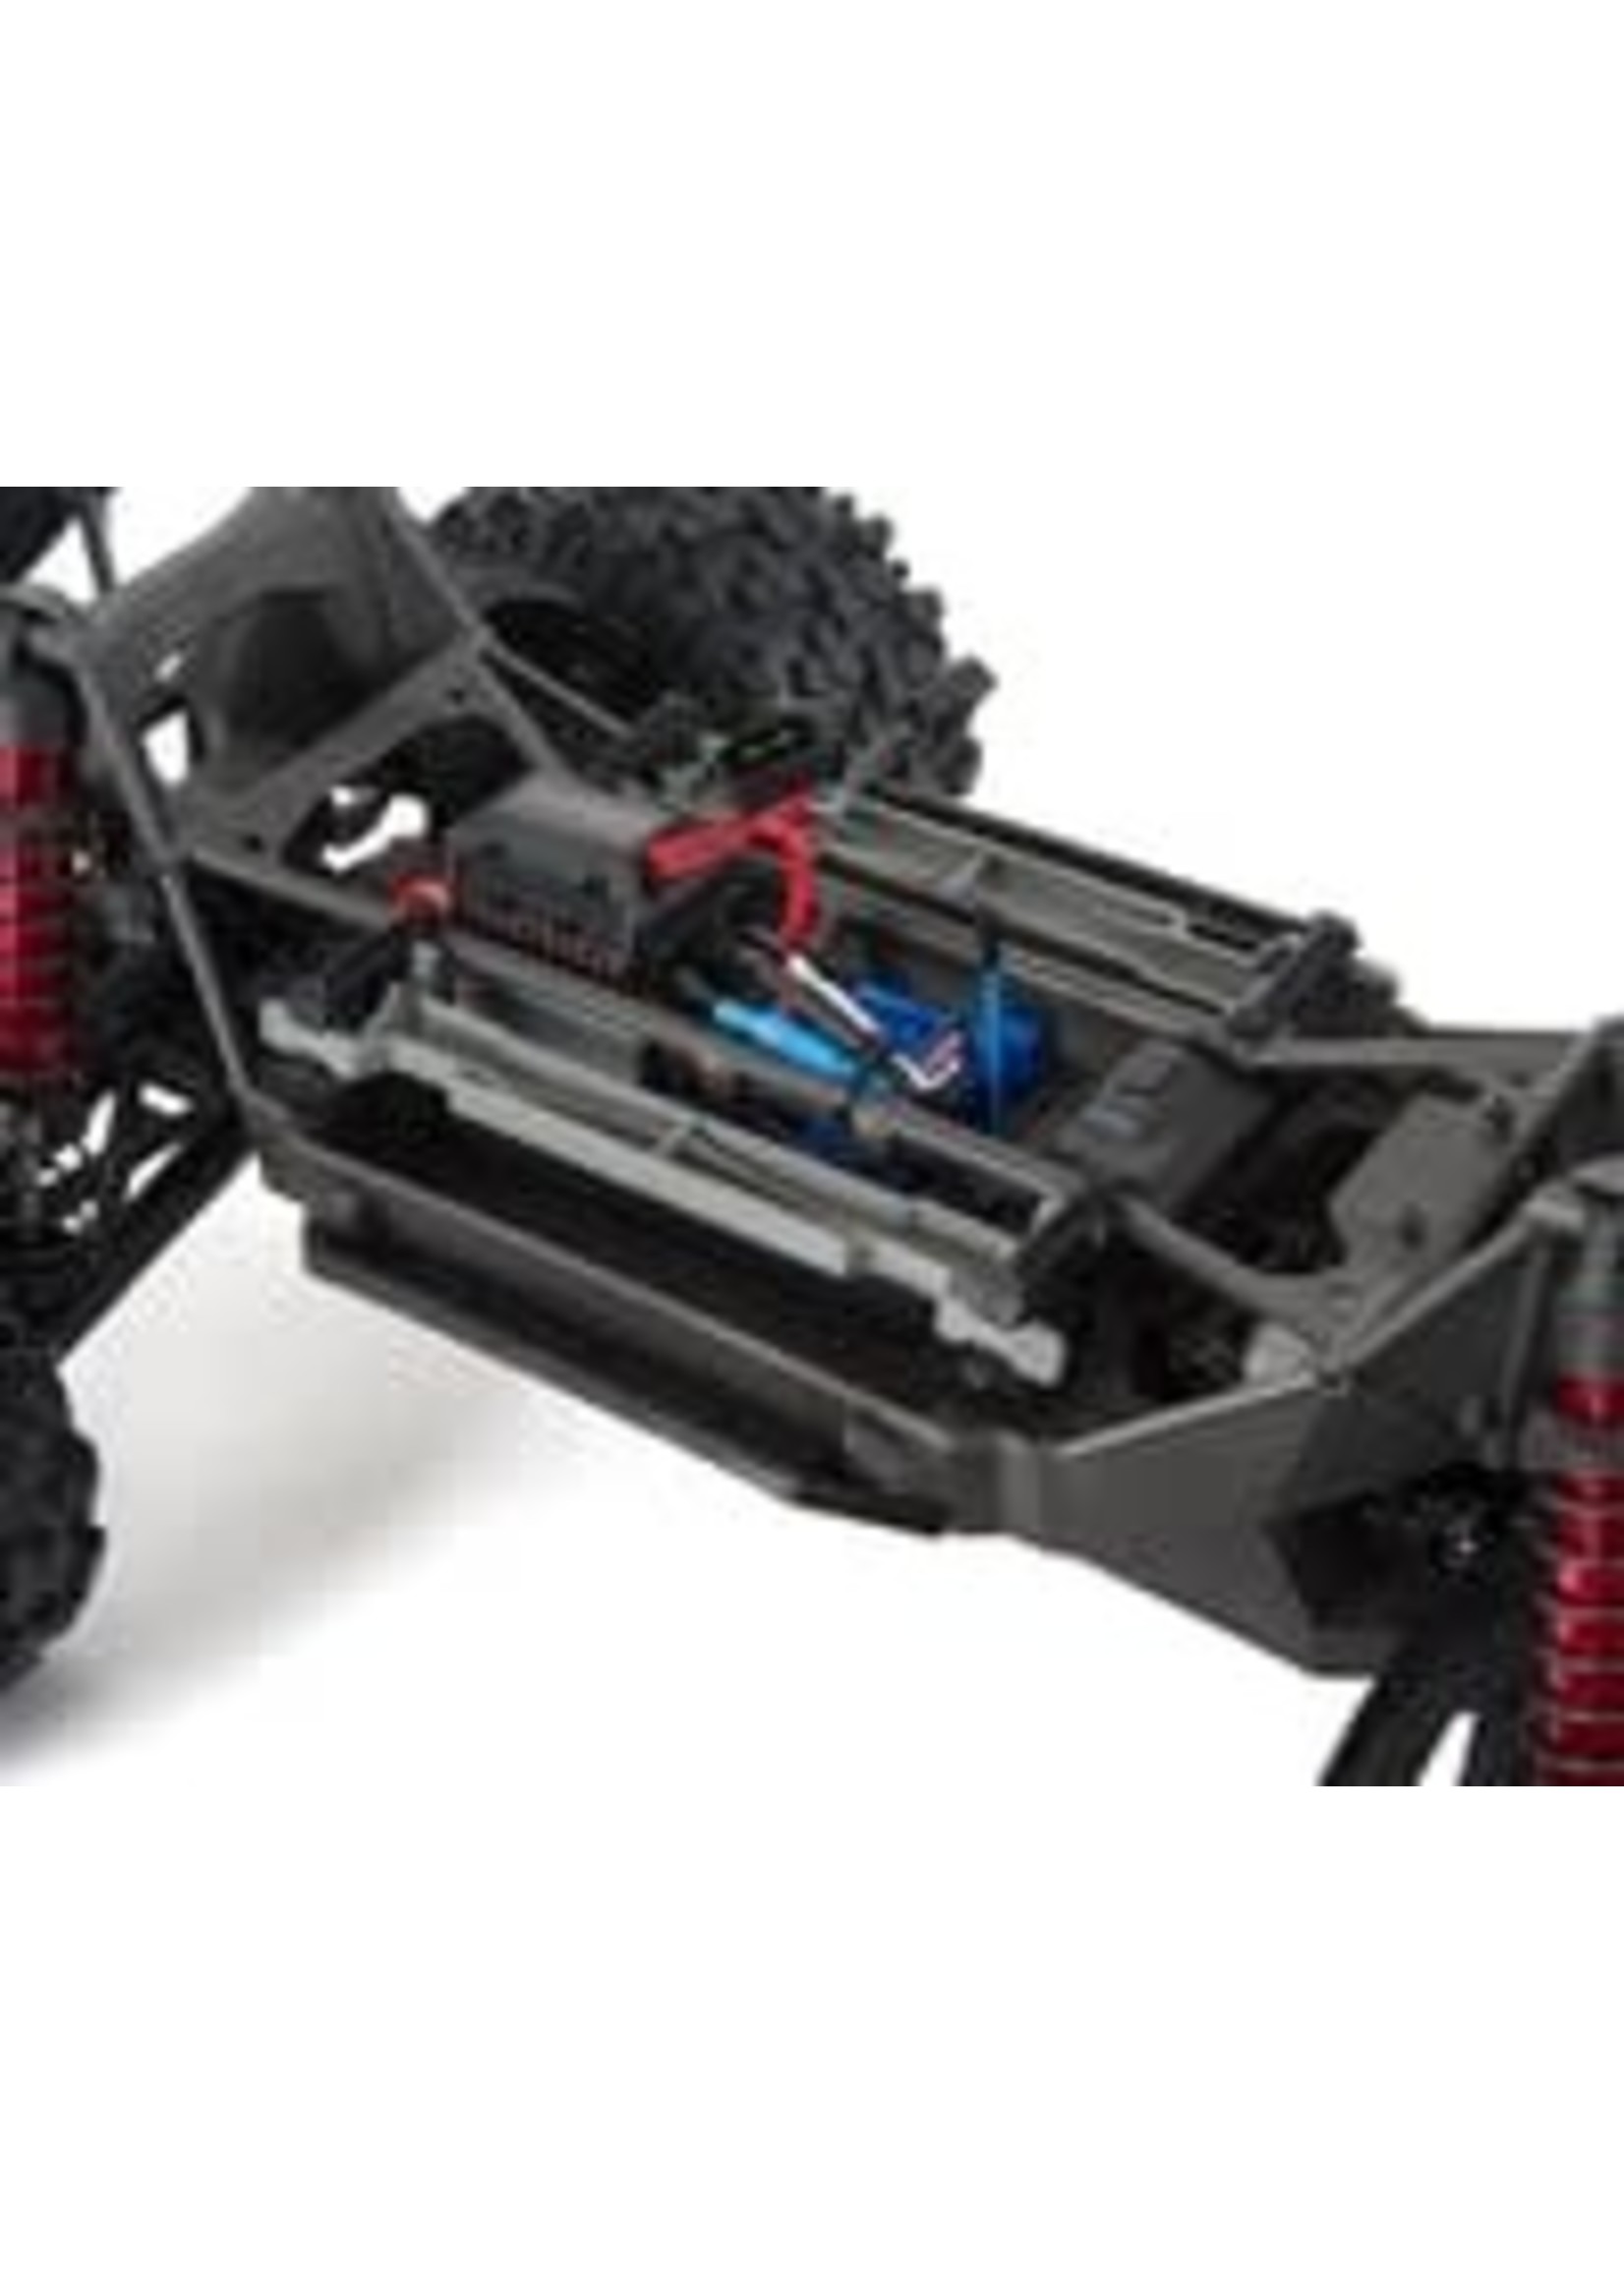 Traxxas 77086-4-REDX X-Maxx : Brushless Electric Monster Truck with TQi Traxxas Link  Enabled 2.4GHz Radio System & Traxxas Stability Management (TSM)